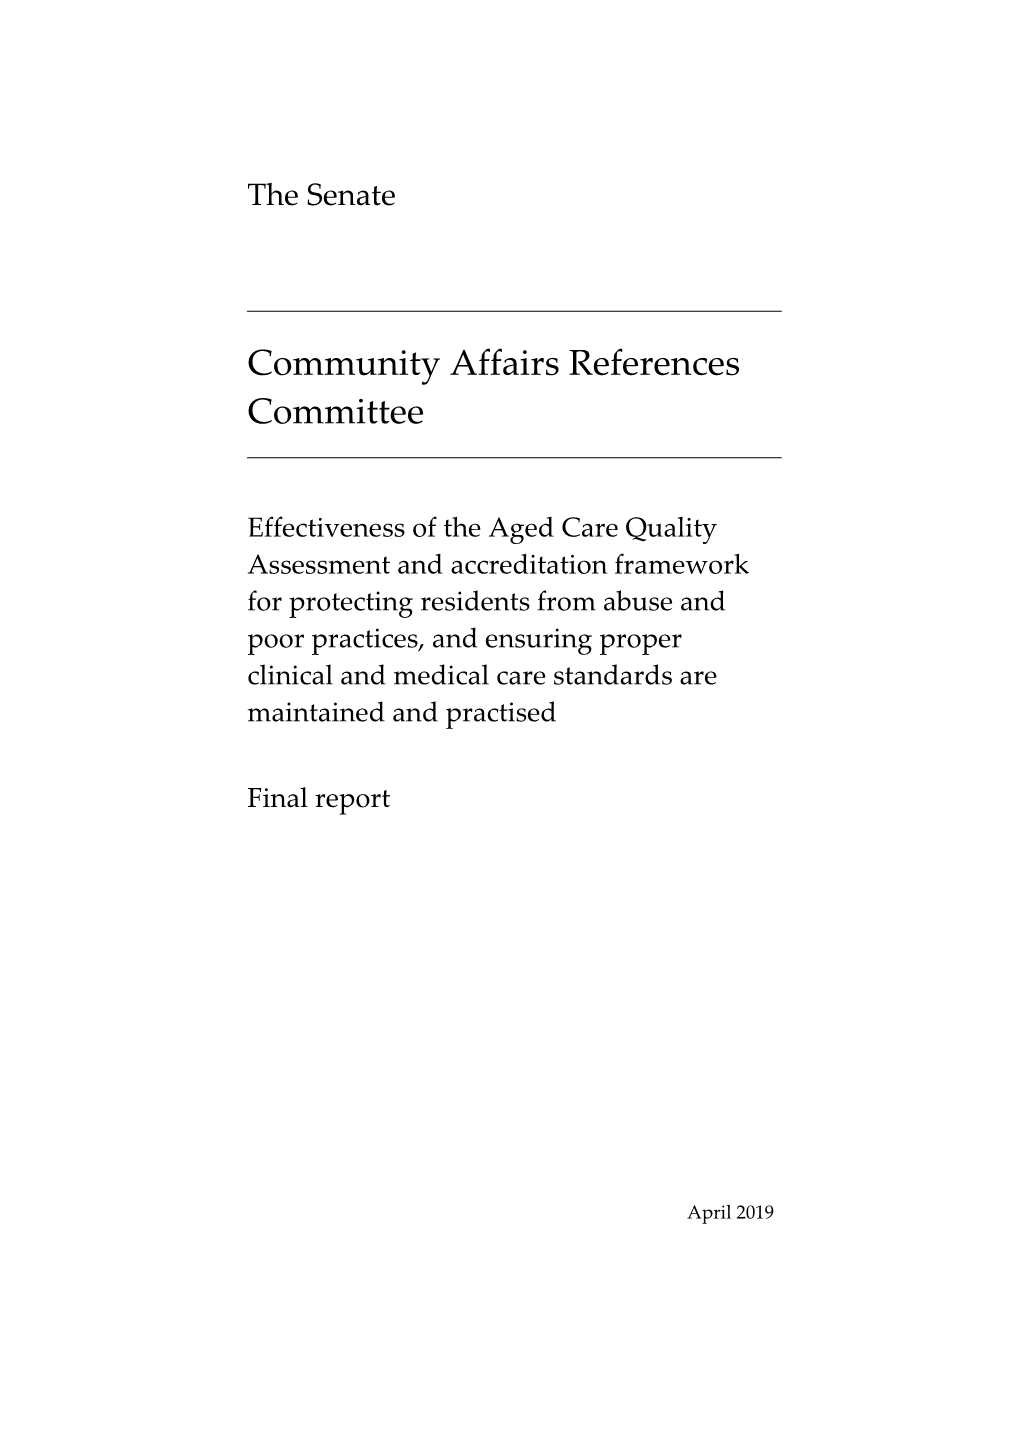 Effectiveness of the Aged Care Quality Assessment And